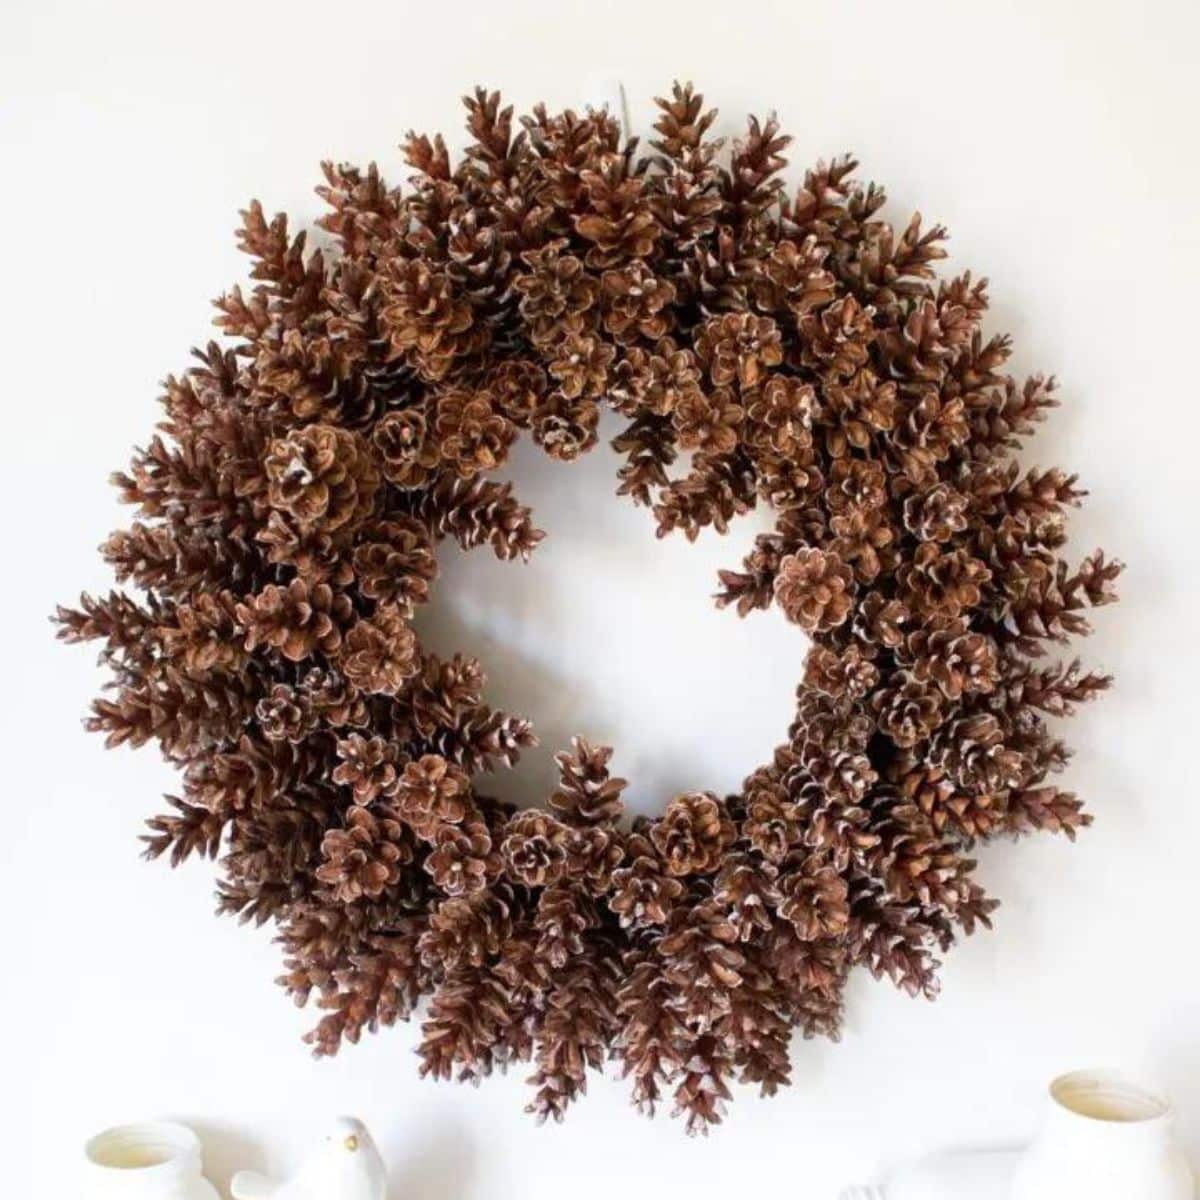 pine cone wreath hung on a white wall